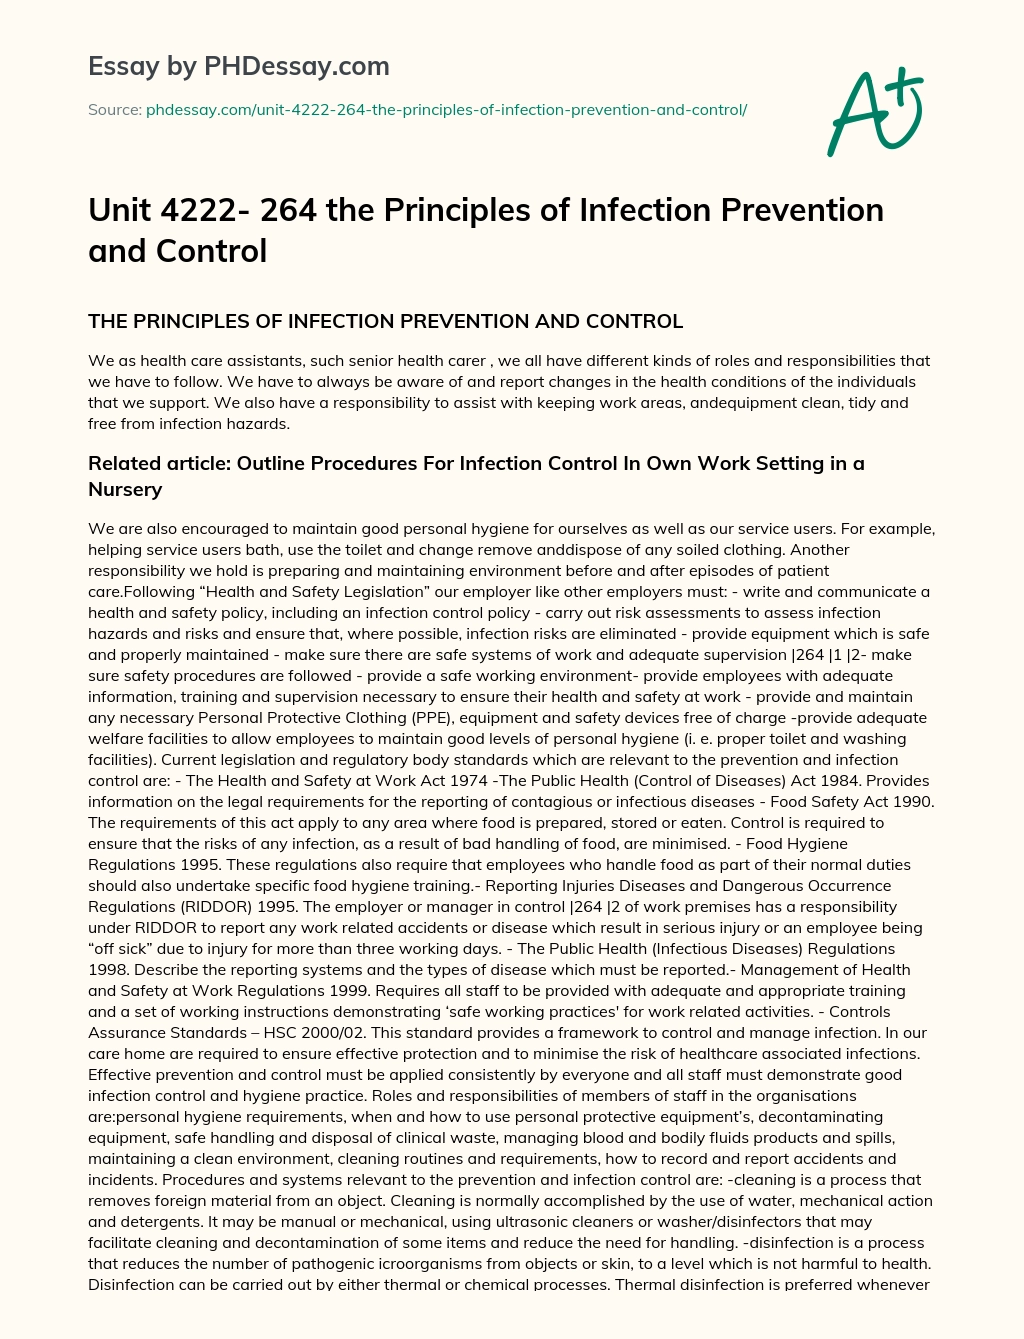 infection control essay